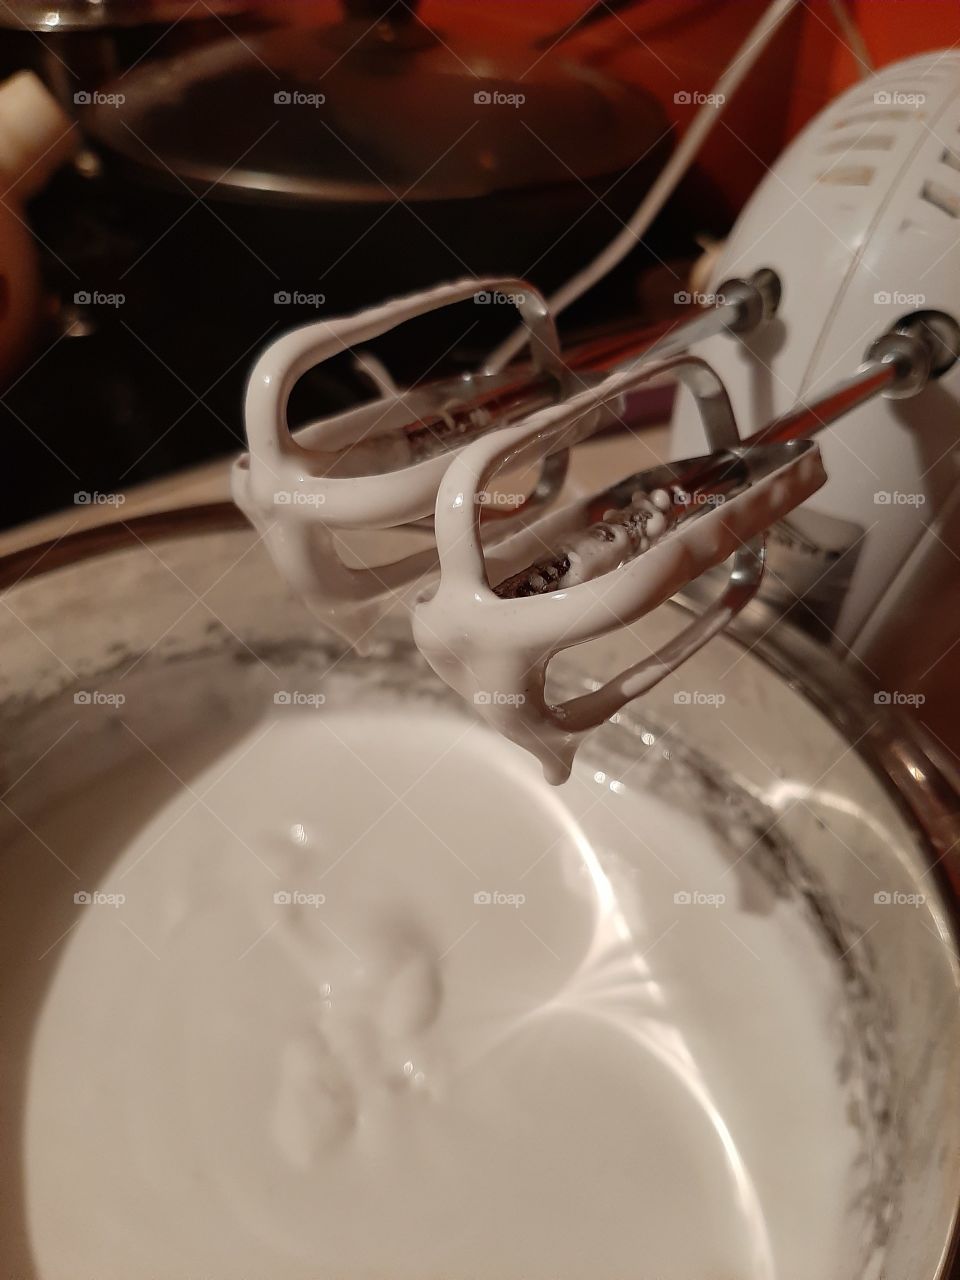 One of the daily activities is preparing sweets for tea. Photo white cream dripping from the beaters of the mixer in a metal Cup with cream.